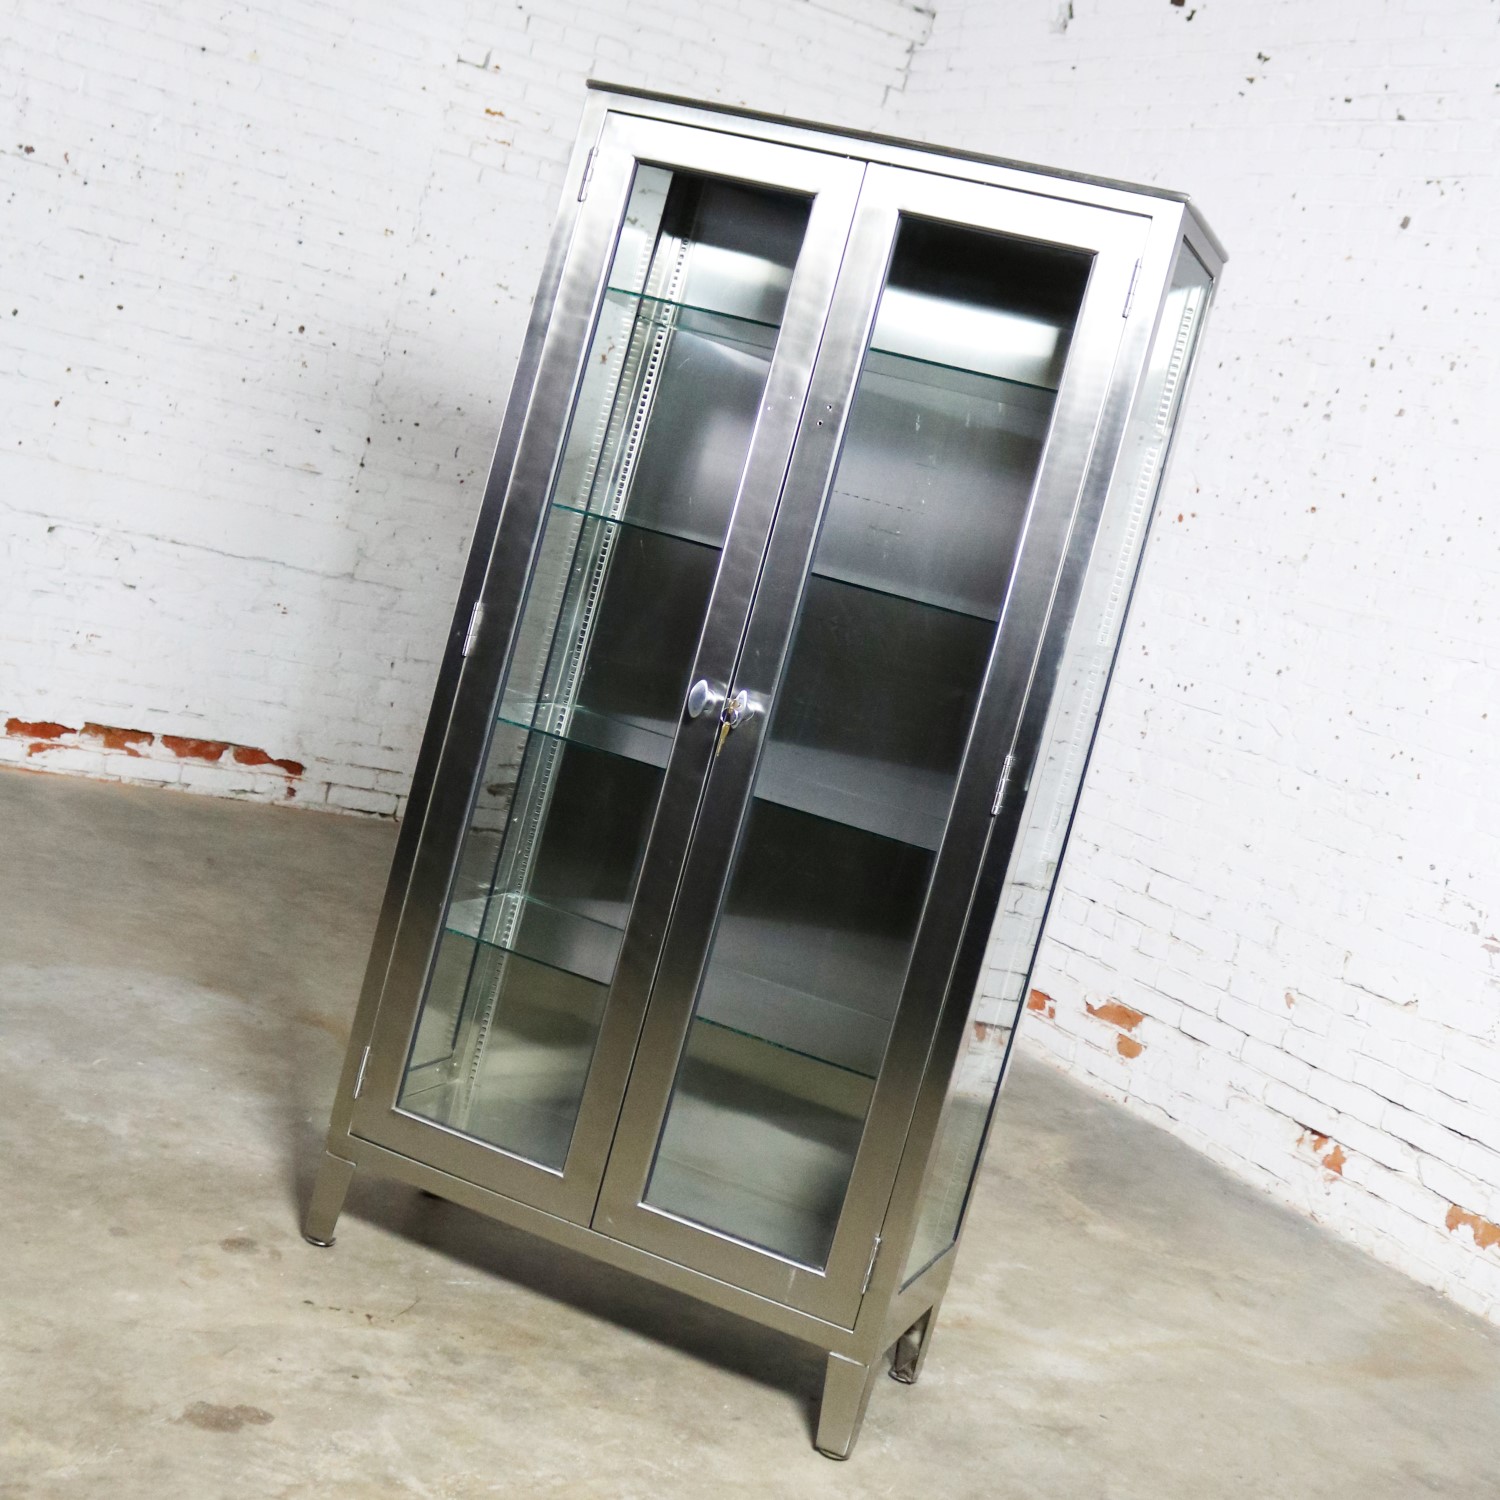 Vintage Stainless Steel Industrial Display Apothecary Medical Cabinet with Glass Doors and Shelves-5